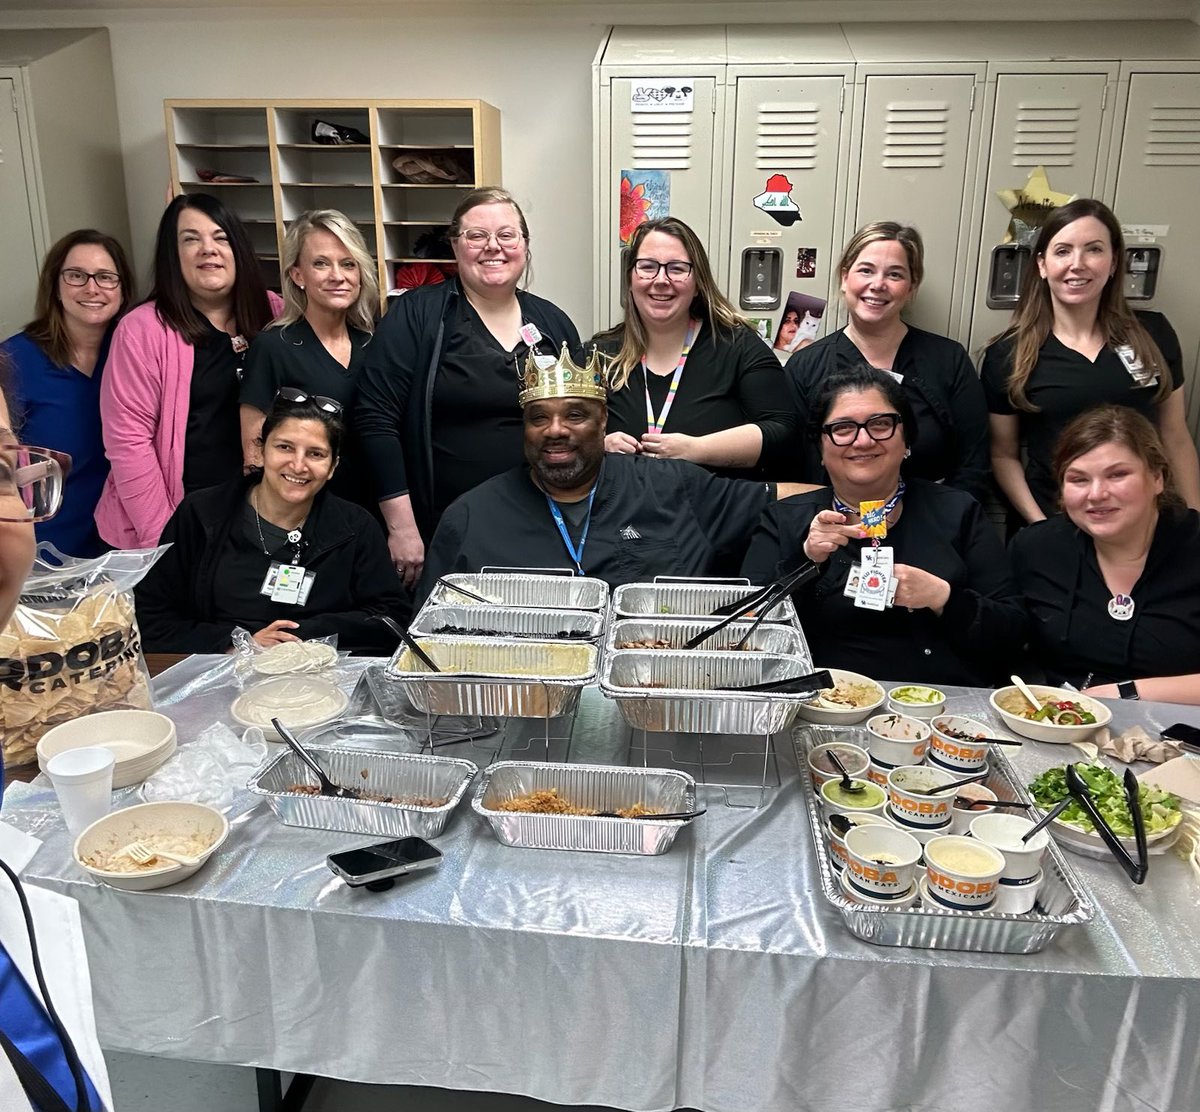 Today we had a wonderful lunch provided by our Amazing Attending’s. We work hard and enjoy the moments like these. Our team is AMAZING! #NDWeek2024 @UKYneuroscience @bensalem_owen